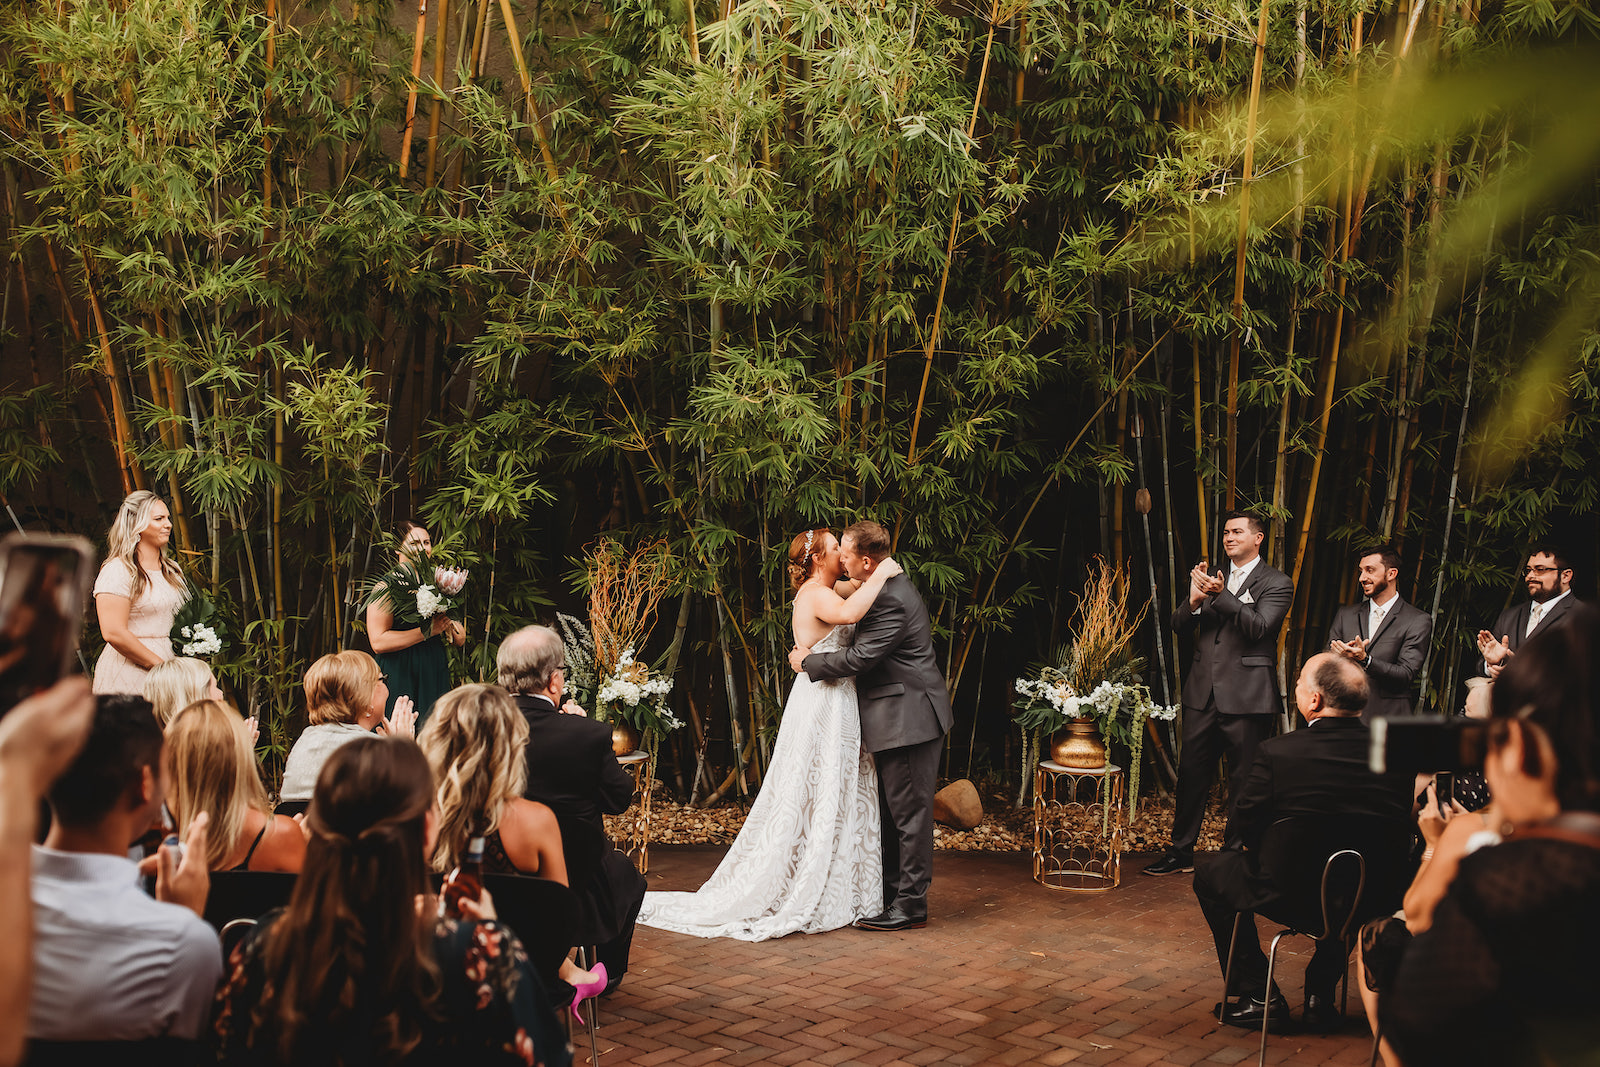 Modern Tropical Inspired Florida Wedding Ceremony in Bamboo Garden, DIY Floral Centerpieces with Bronze Base and Greenery, Bride and Groom Exchanging First Kiss During Outdoor Ceremony | Downtown St. Pete Historic Wedding Venue NOVA 535 - Courtyard